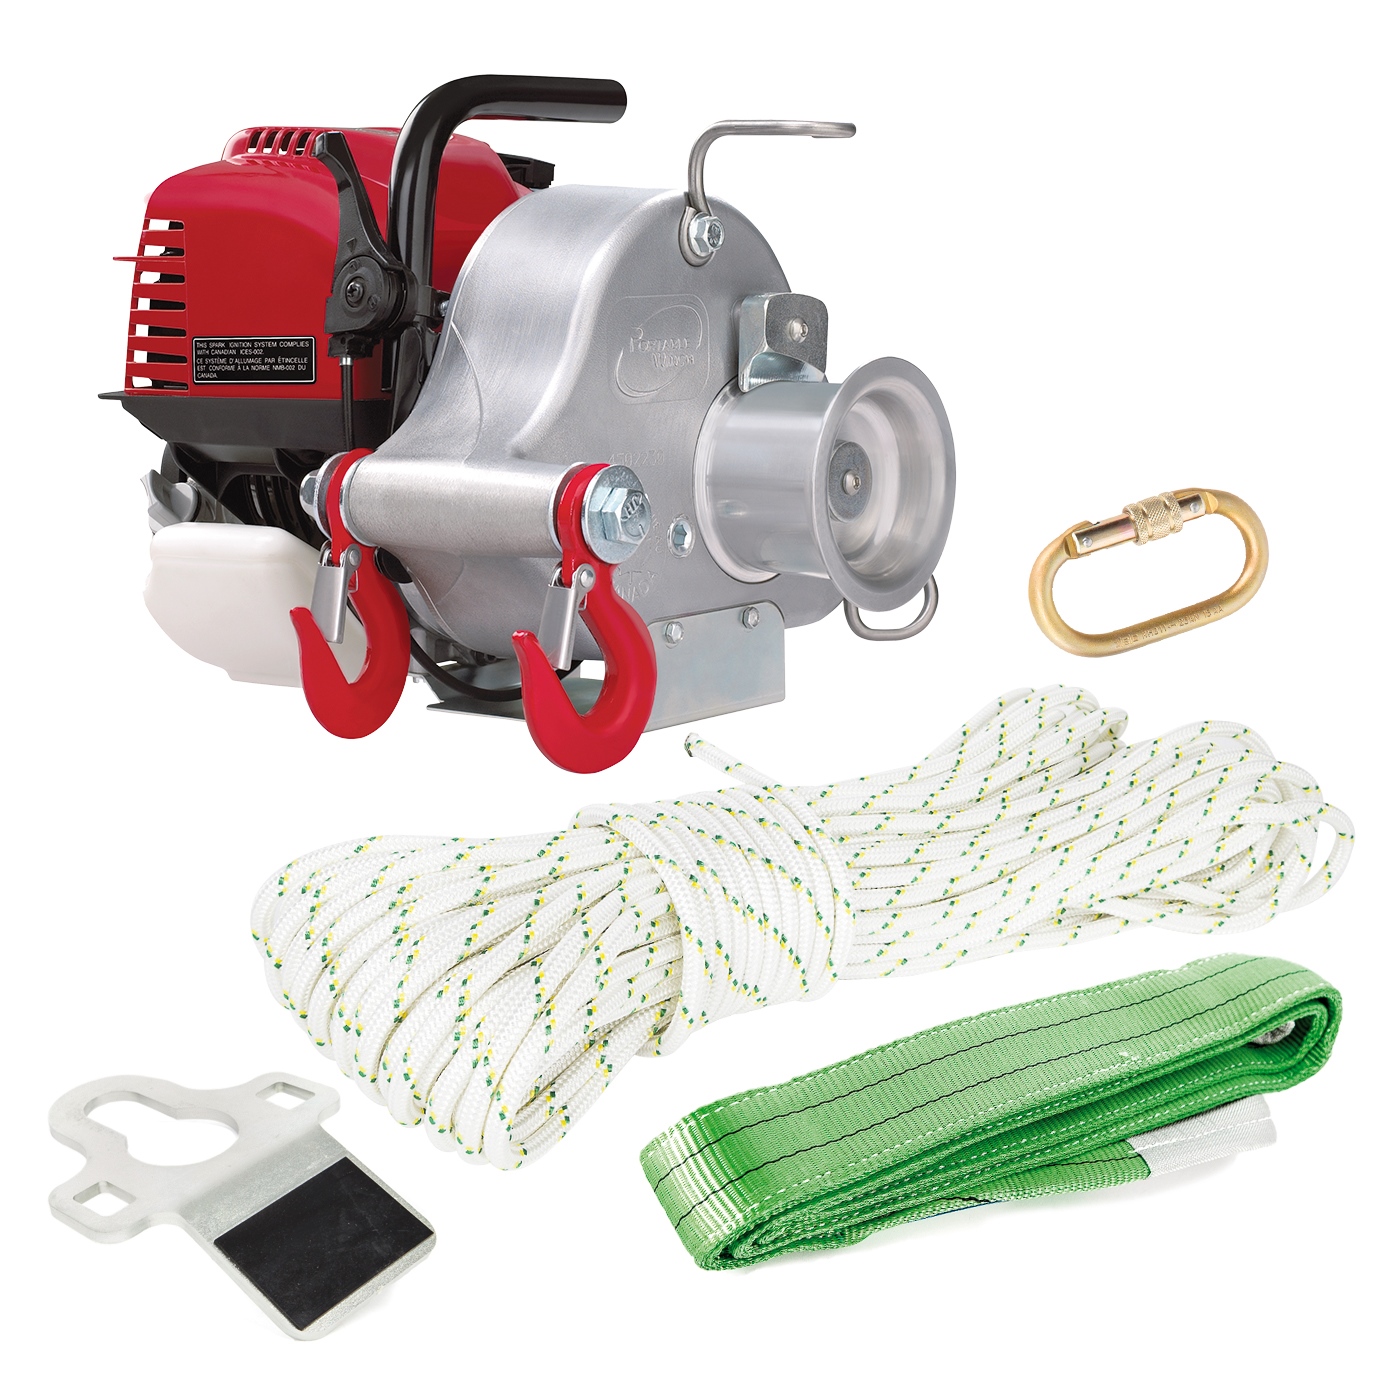 1,550-Lb Portable Winch Gas-Powered Capstan Winch Model Number PCW3000 Pulling Capacity 1.34 Honda GX-35 Engine 